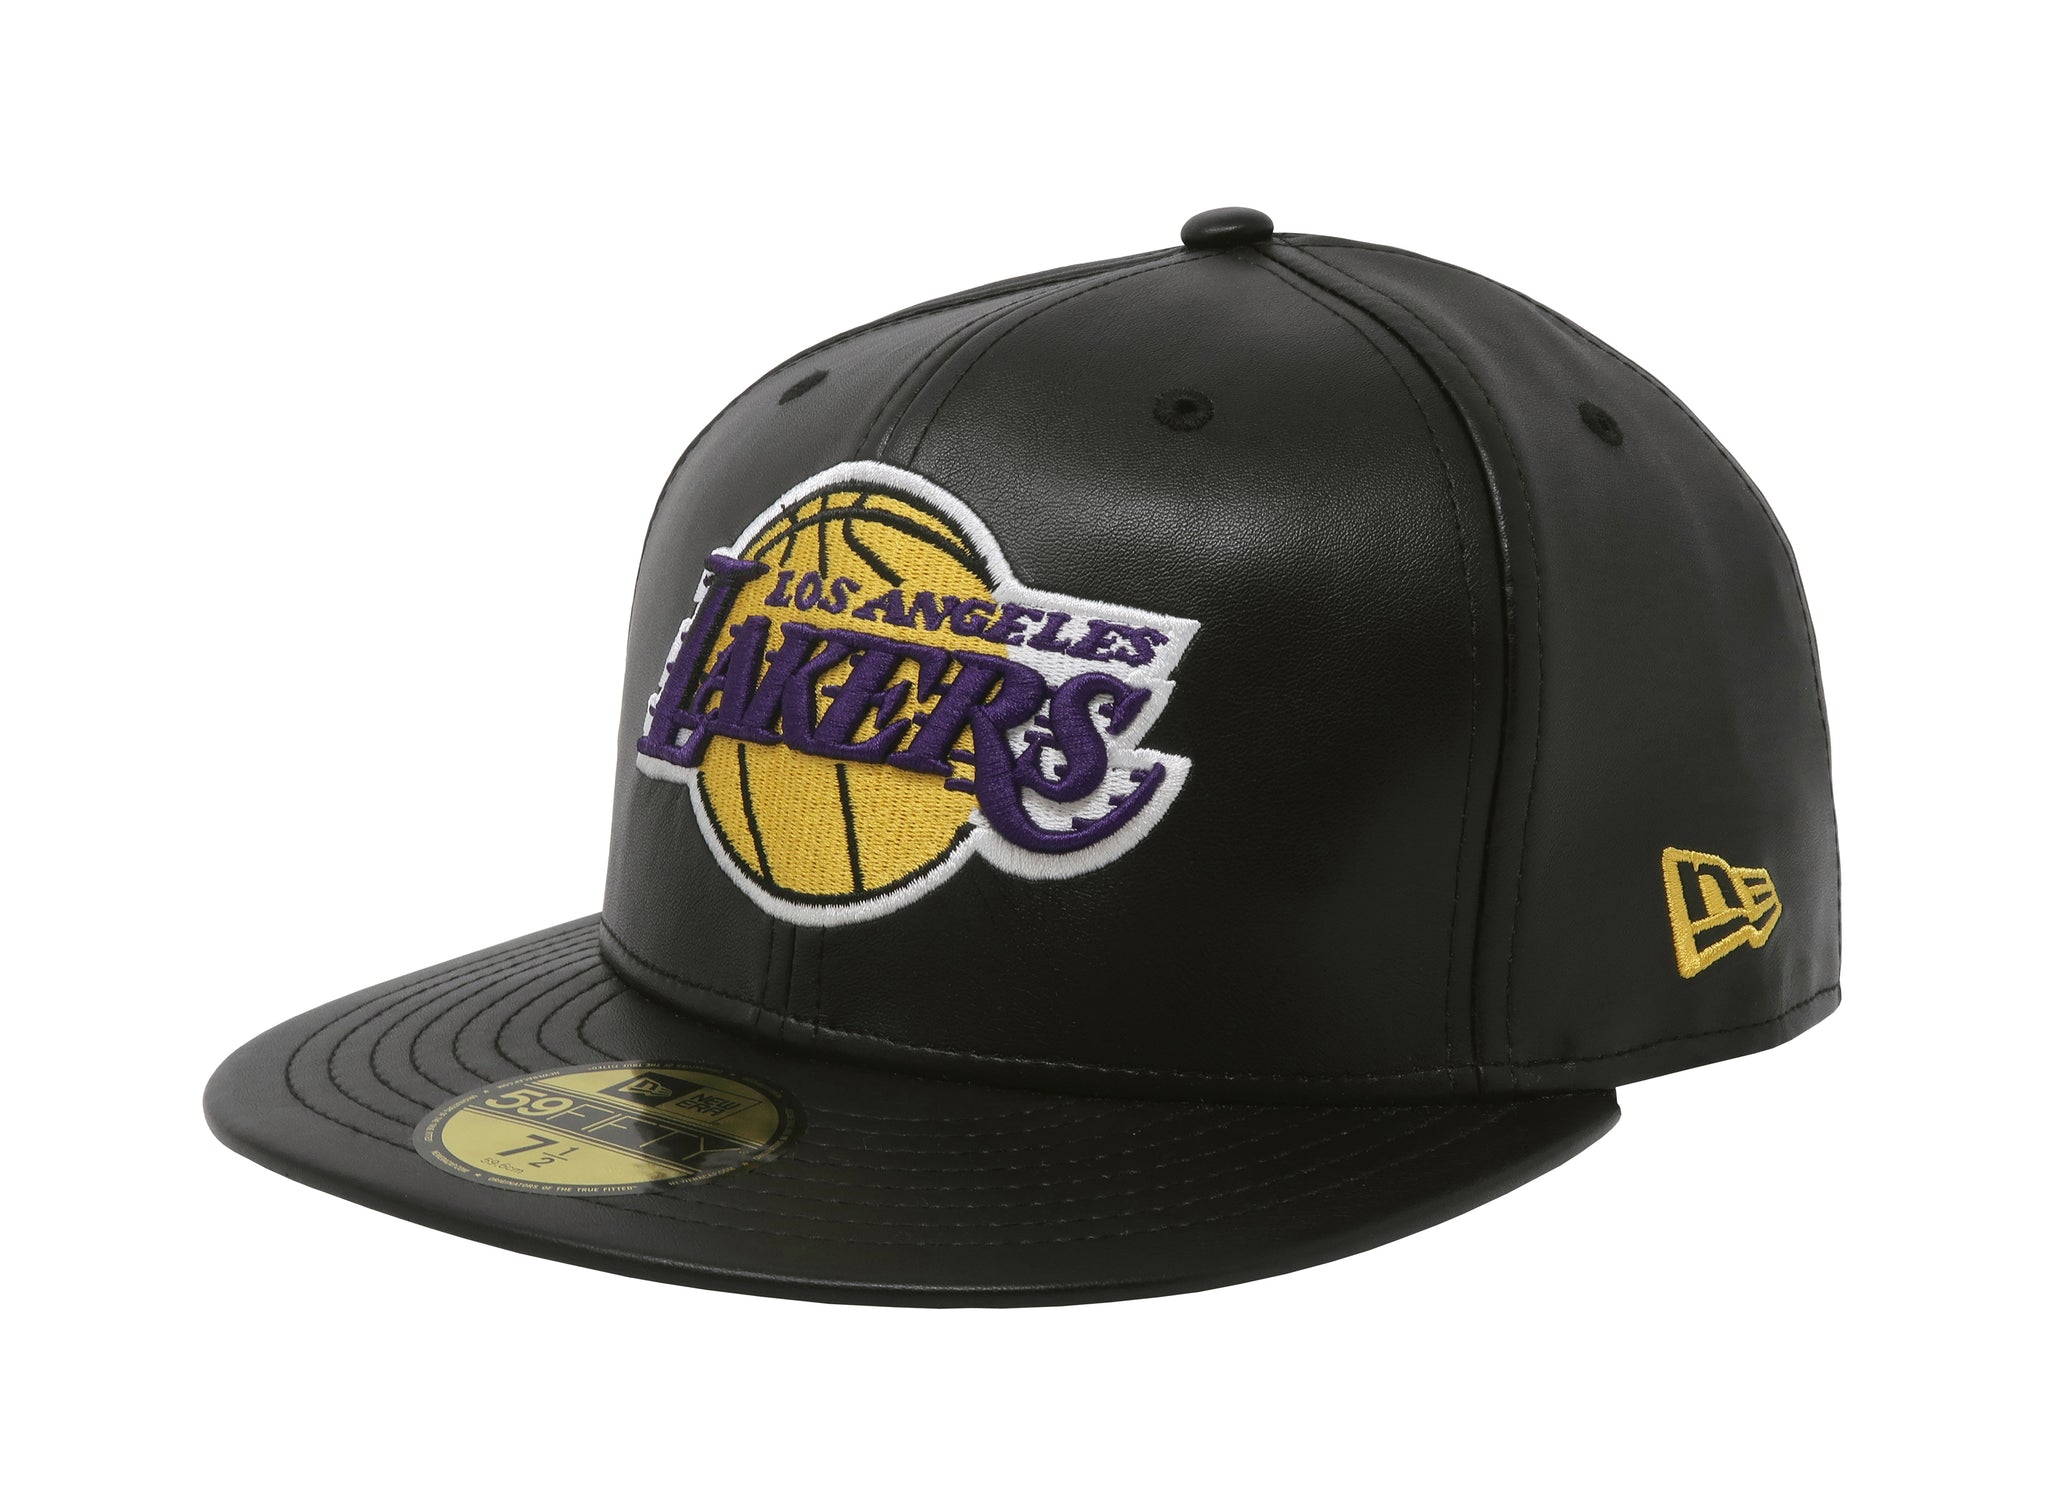 New Era 59Fifty Men's NBA Los Angeles Lakers Black Fitted Size Cap